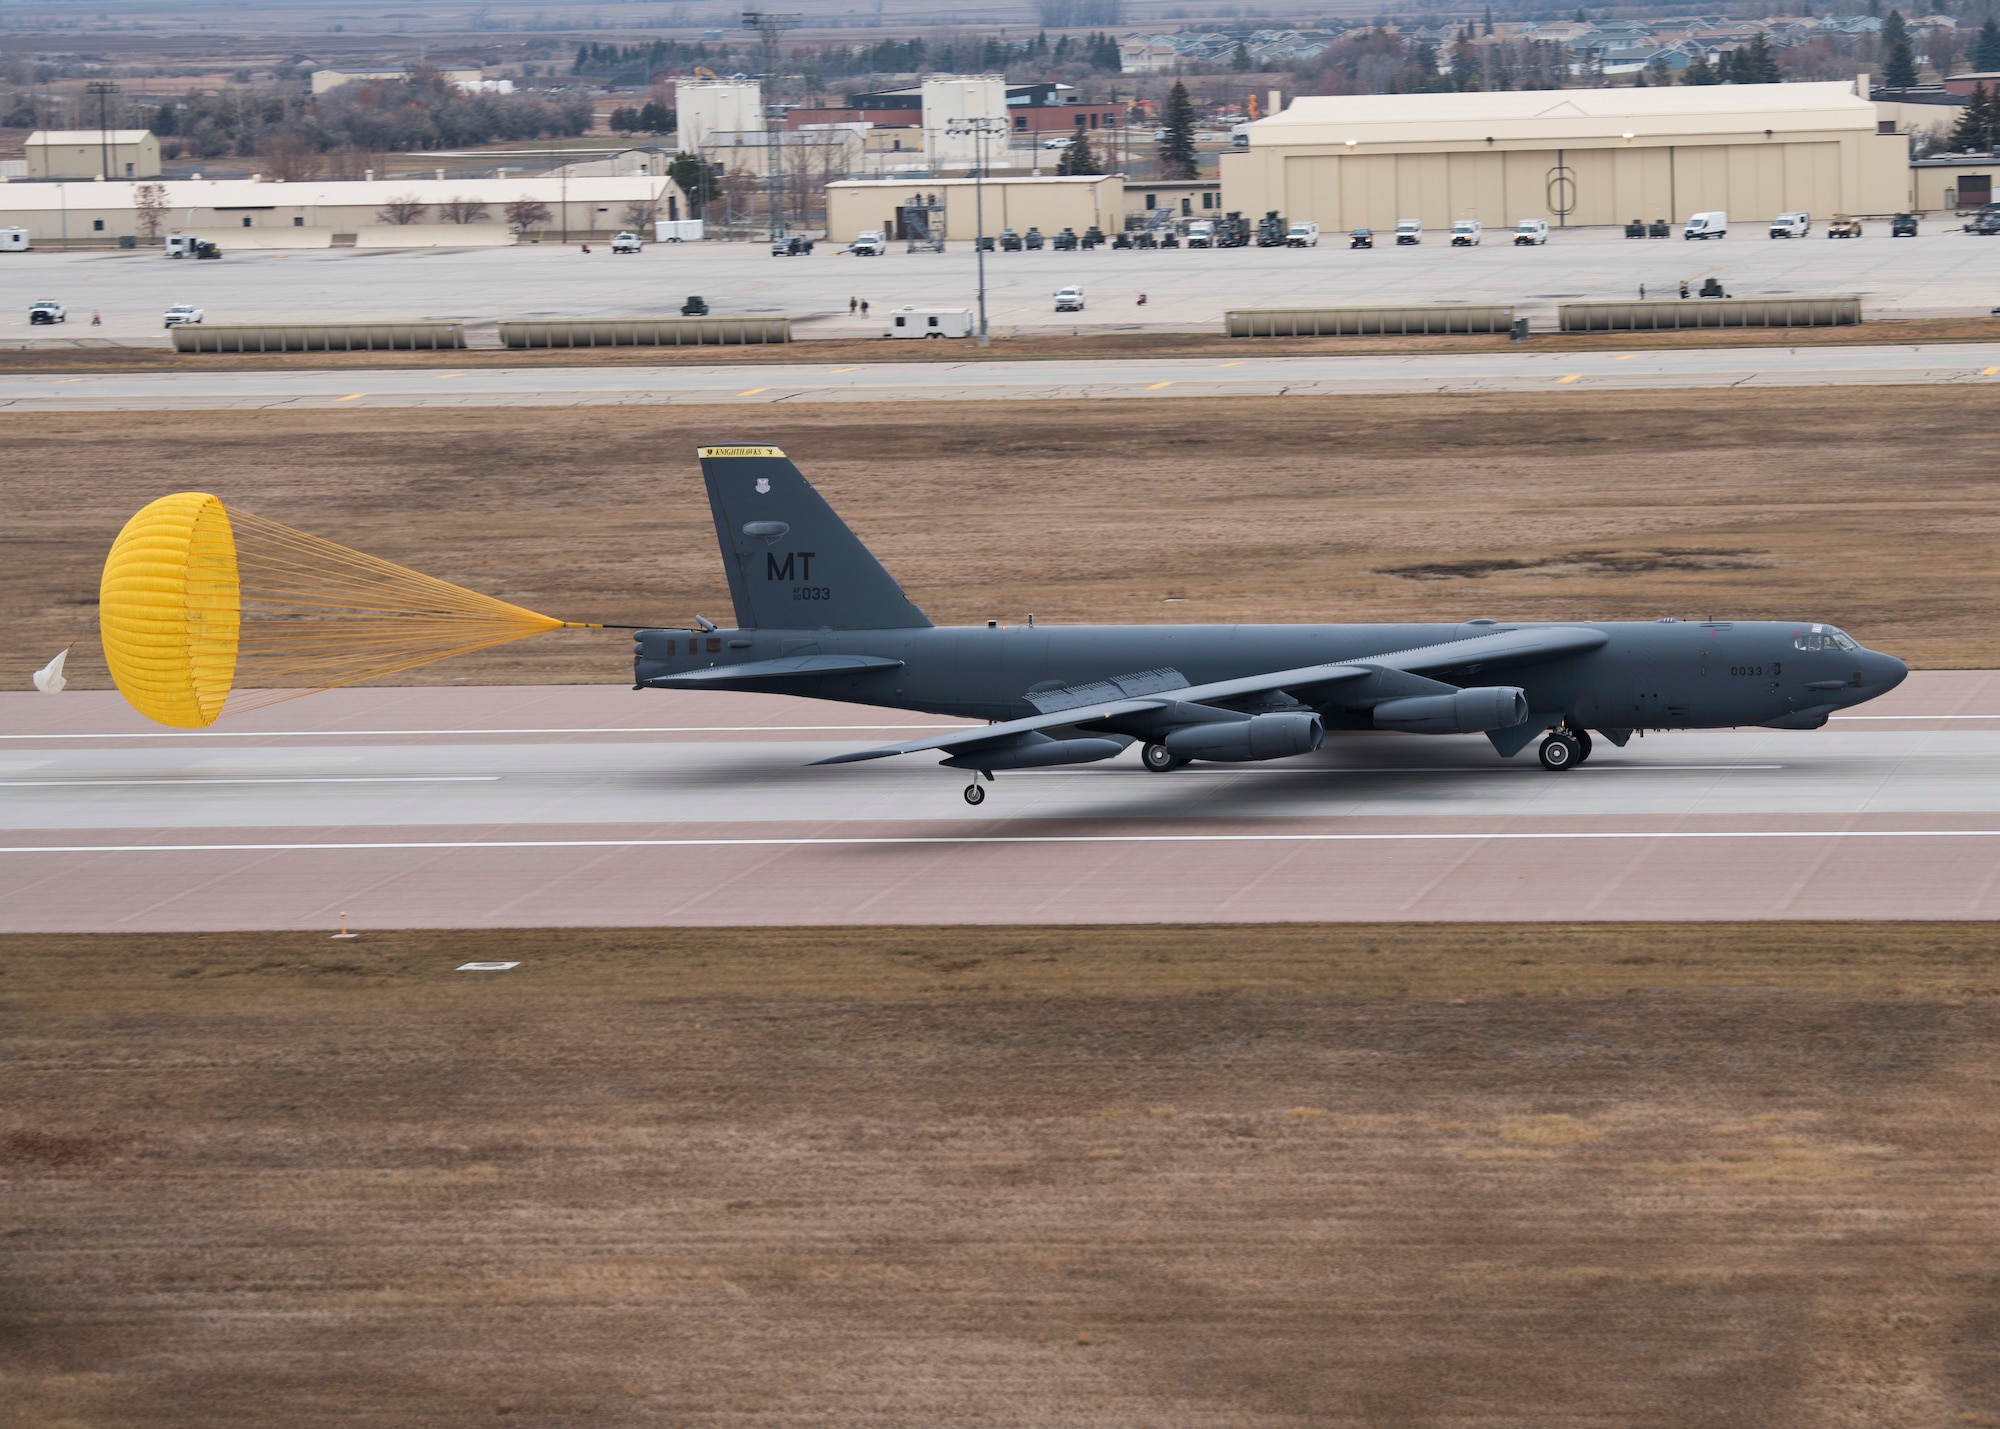 A B-52H Stratofortress taxis down the flightline during Global Thunder 19 at Minot Air Force Base, N.D., Nov. 4, 2018. Global Thunder is a globally integrated exercise that provides training opportunities that assess all U.S. Strategic Command (USSTRATCOM) mission areas and joint and field training operational readiness, with a specific focus on nuclear readiness. USSTRATCOM has global responsibilities assigned through the Unified Command Plan that includes strategic deterrence, nuclear operations, space operations, joint electromagnetic spectrum operations, global strike, missile defense, and analysis and targeting. (U.S. Air Force photo by Senior Airman Alyssa M. Akers)